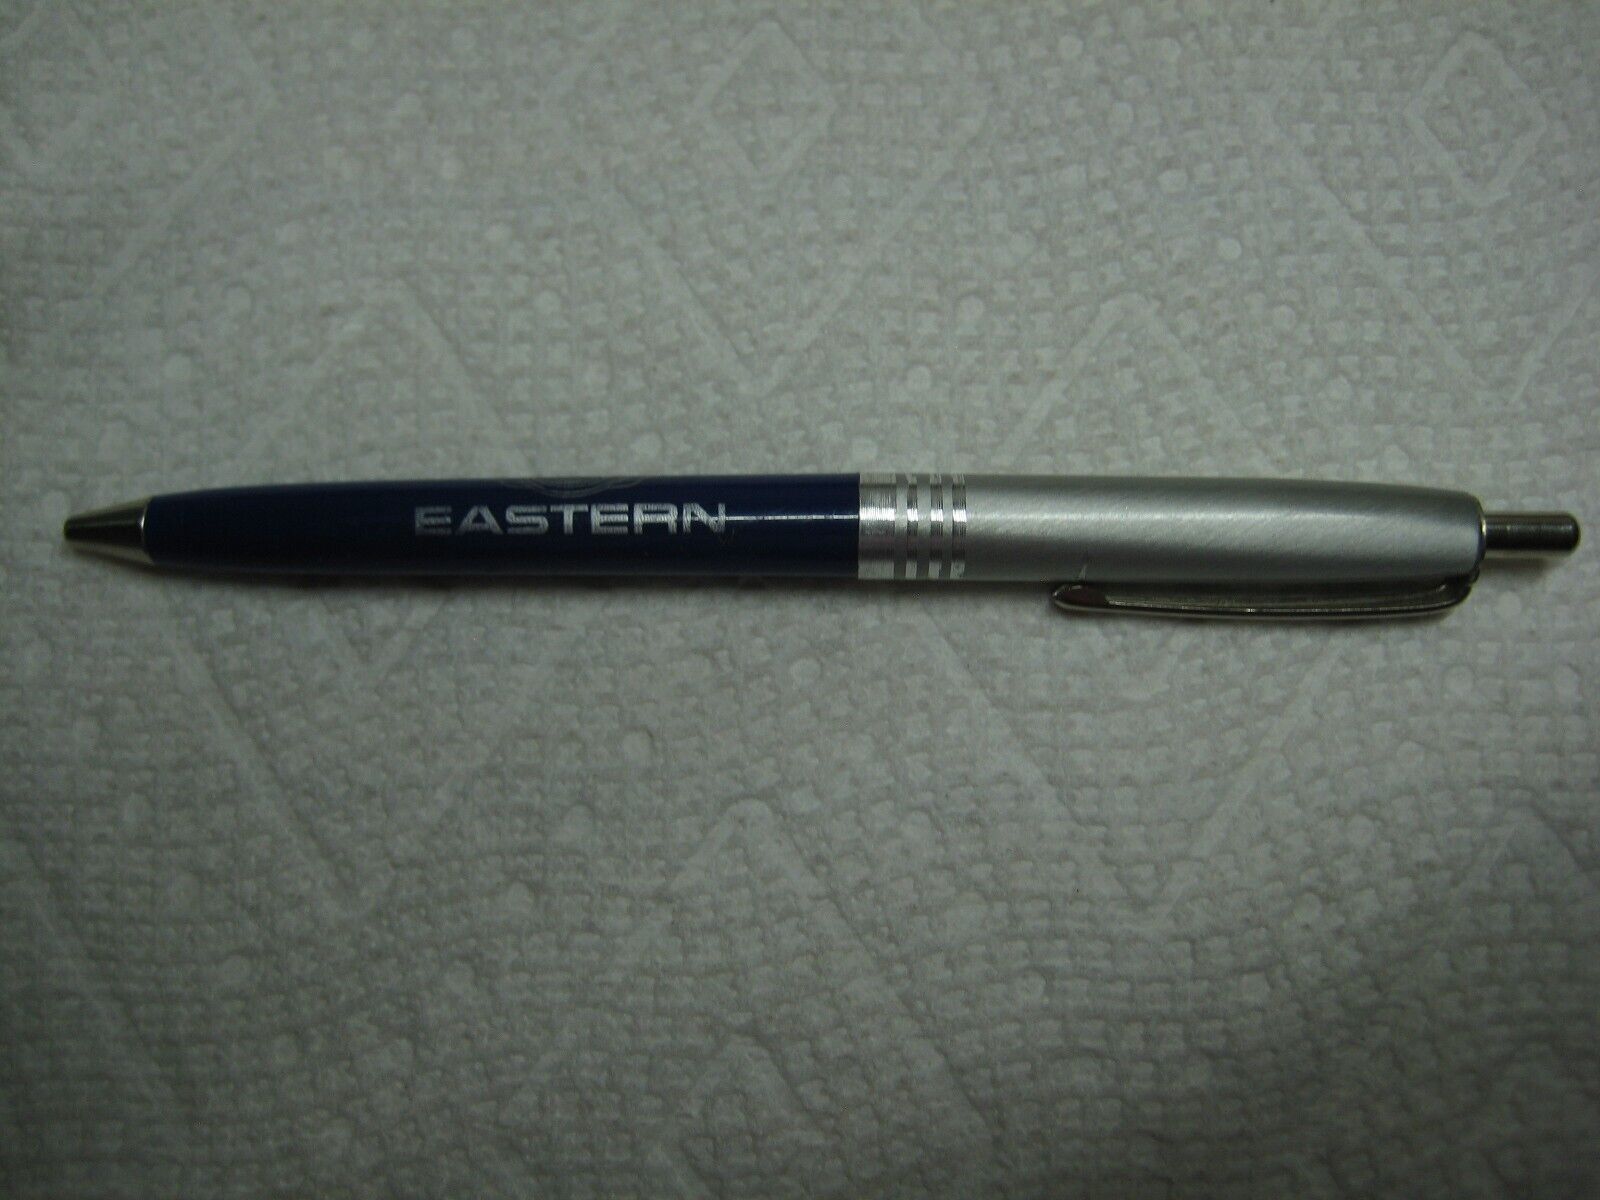 collectable airlines Eastern pens